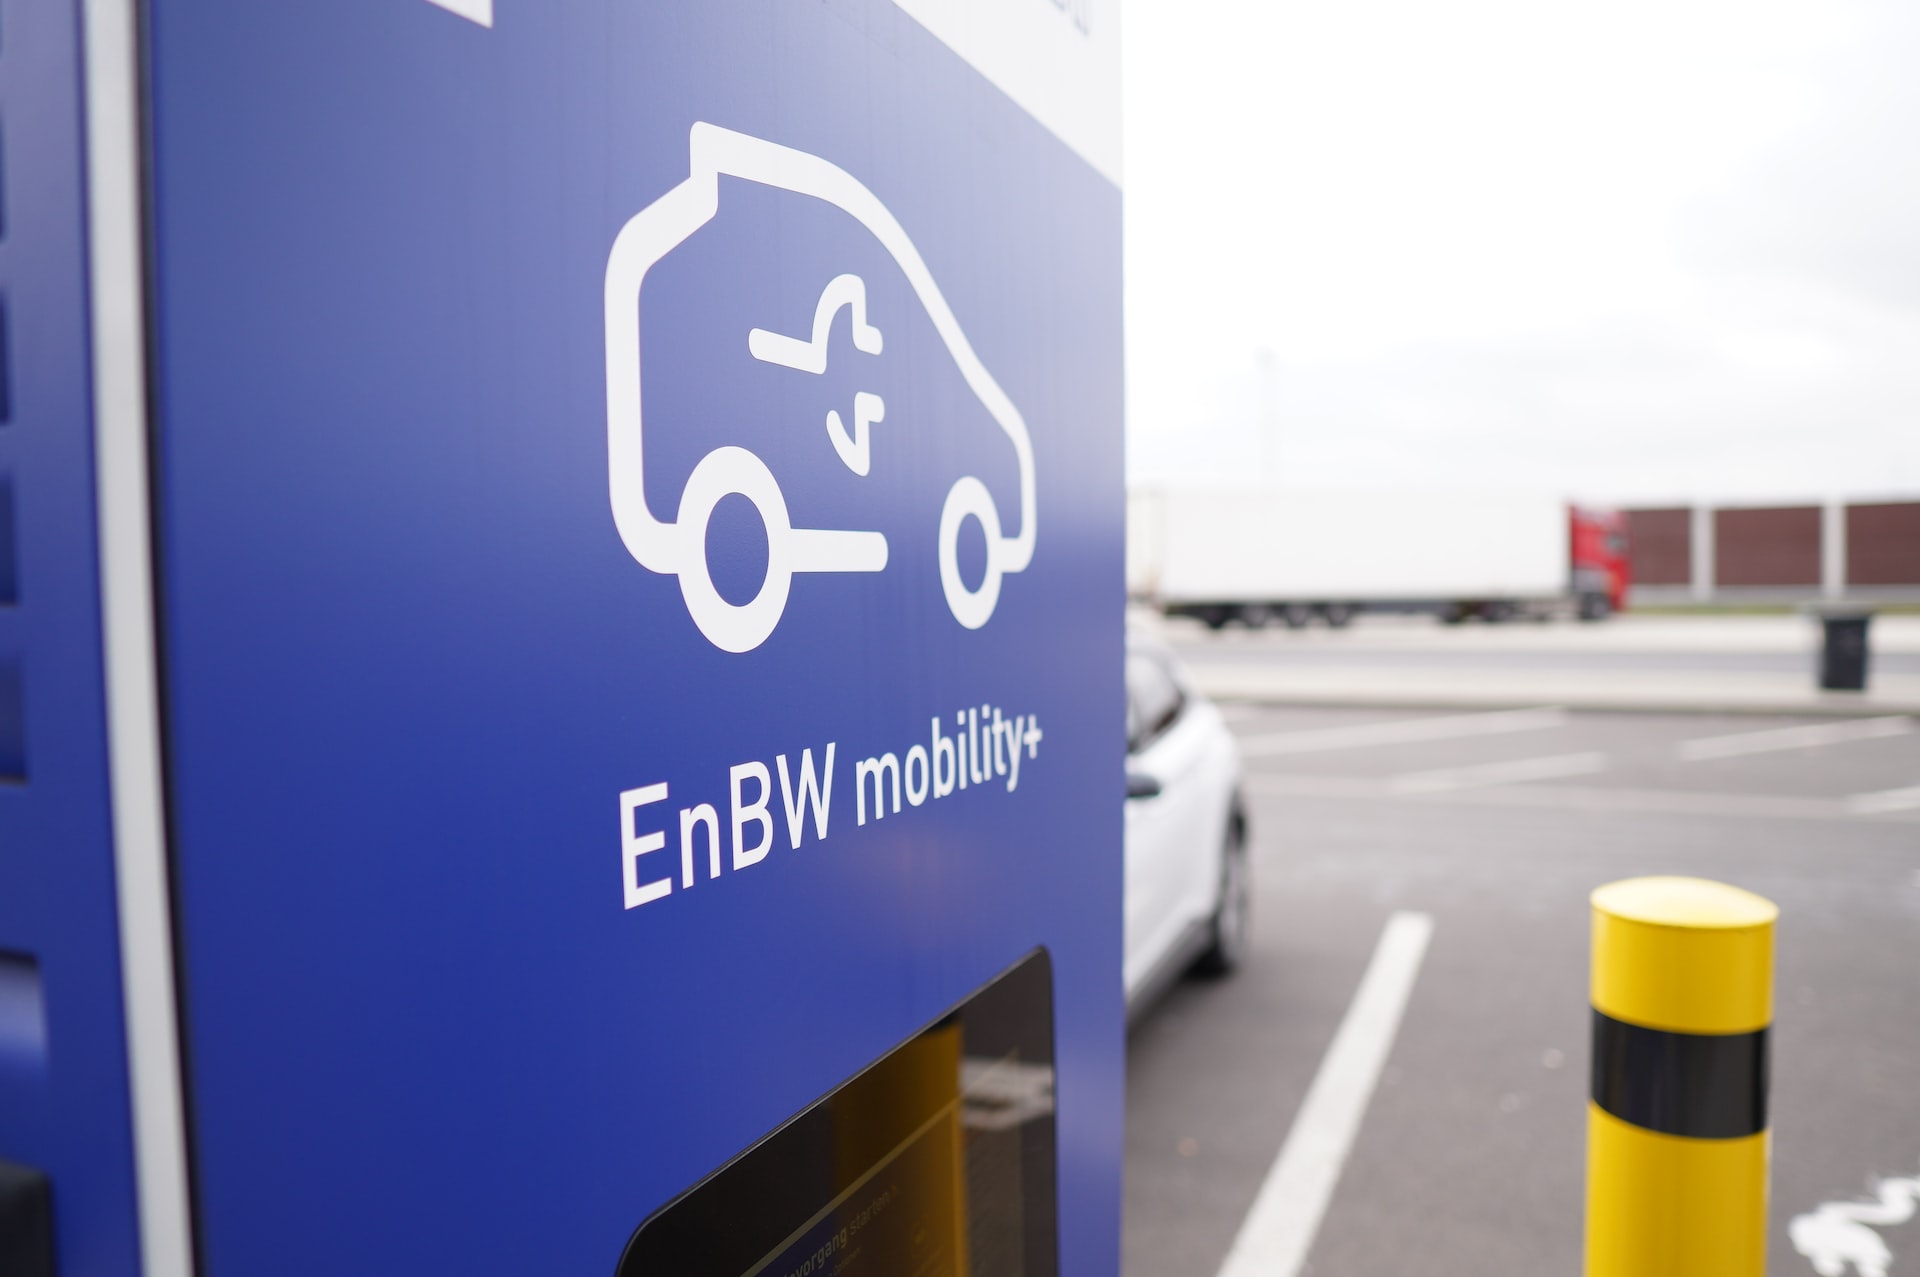 EnBW mobility+ sign.